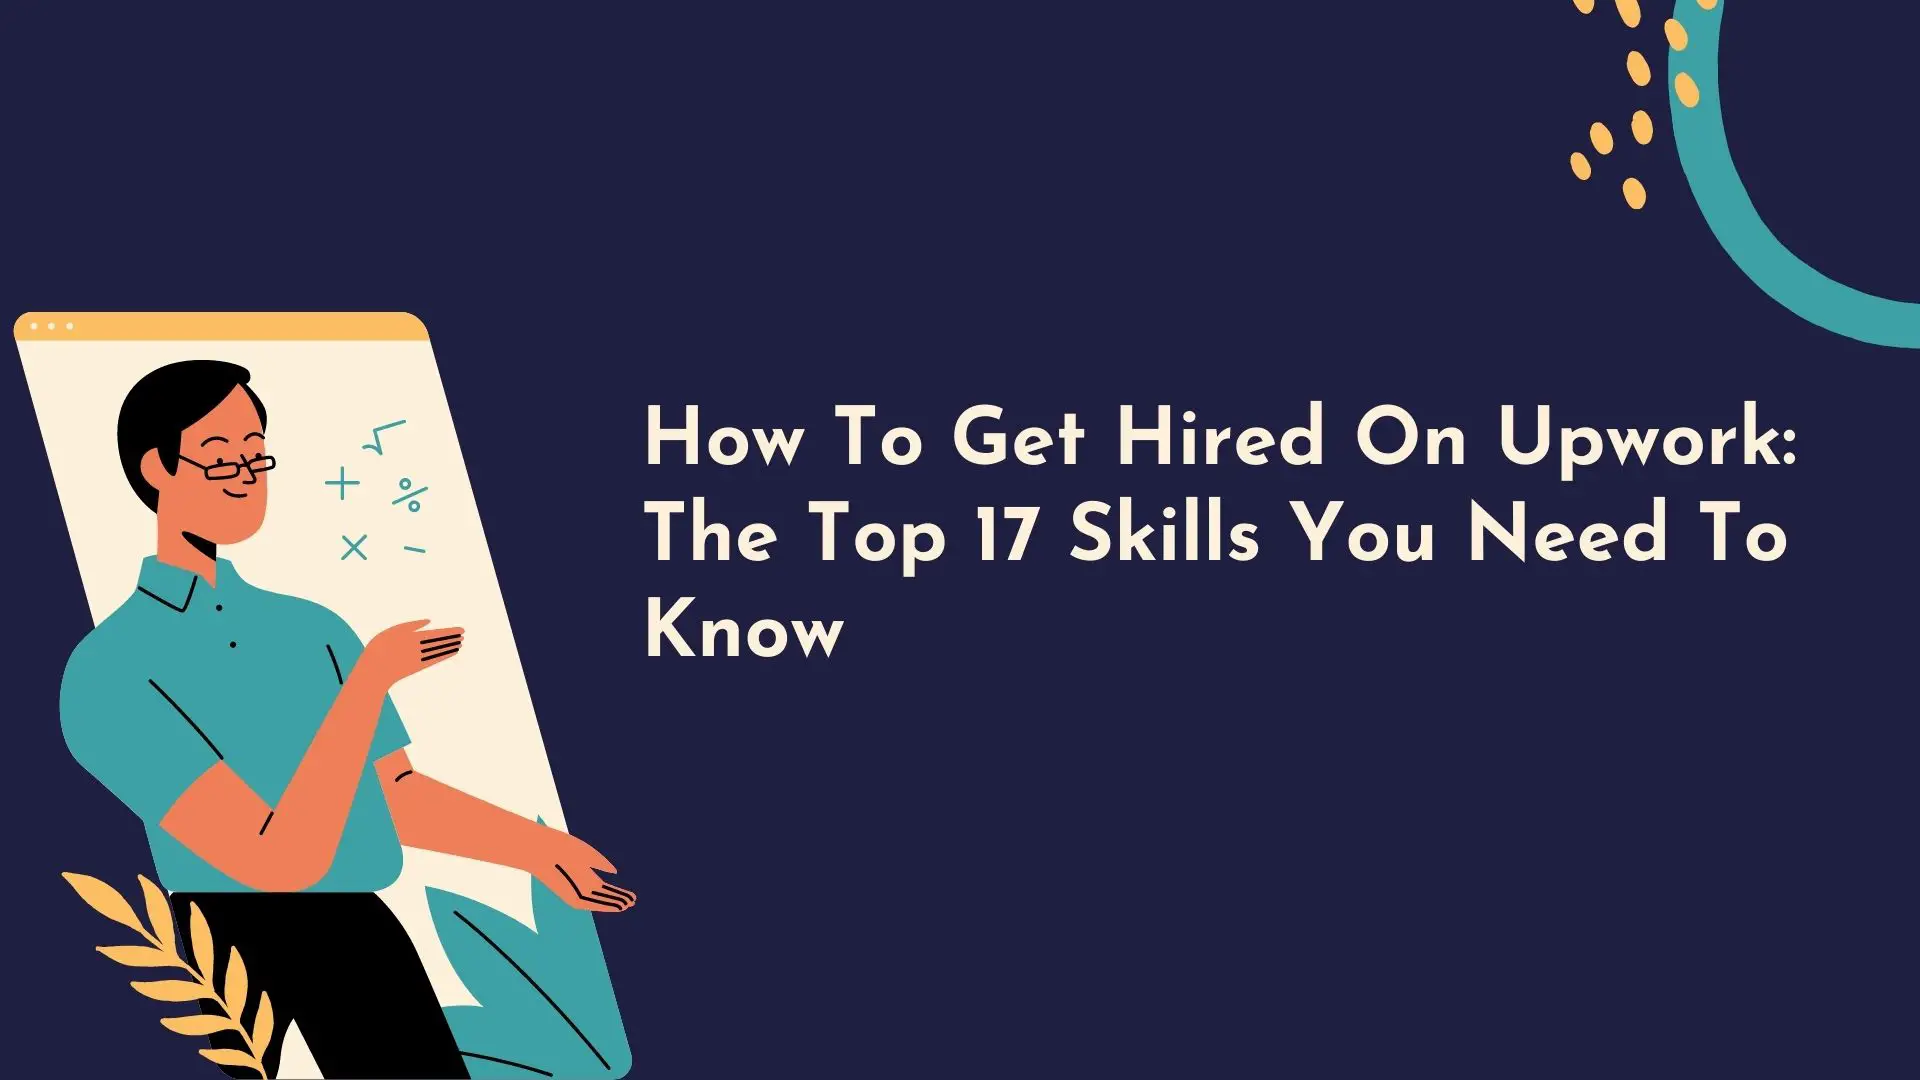 How To Get Hired On Upwork: The Top 17 Skills You Need To Know